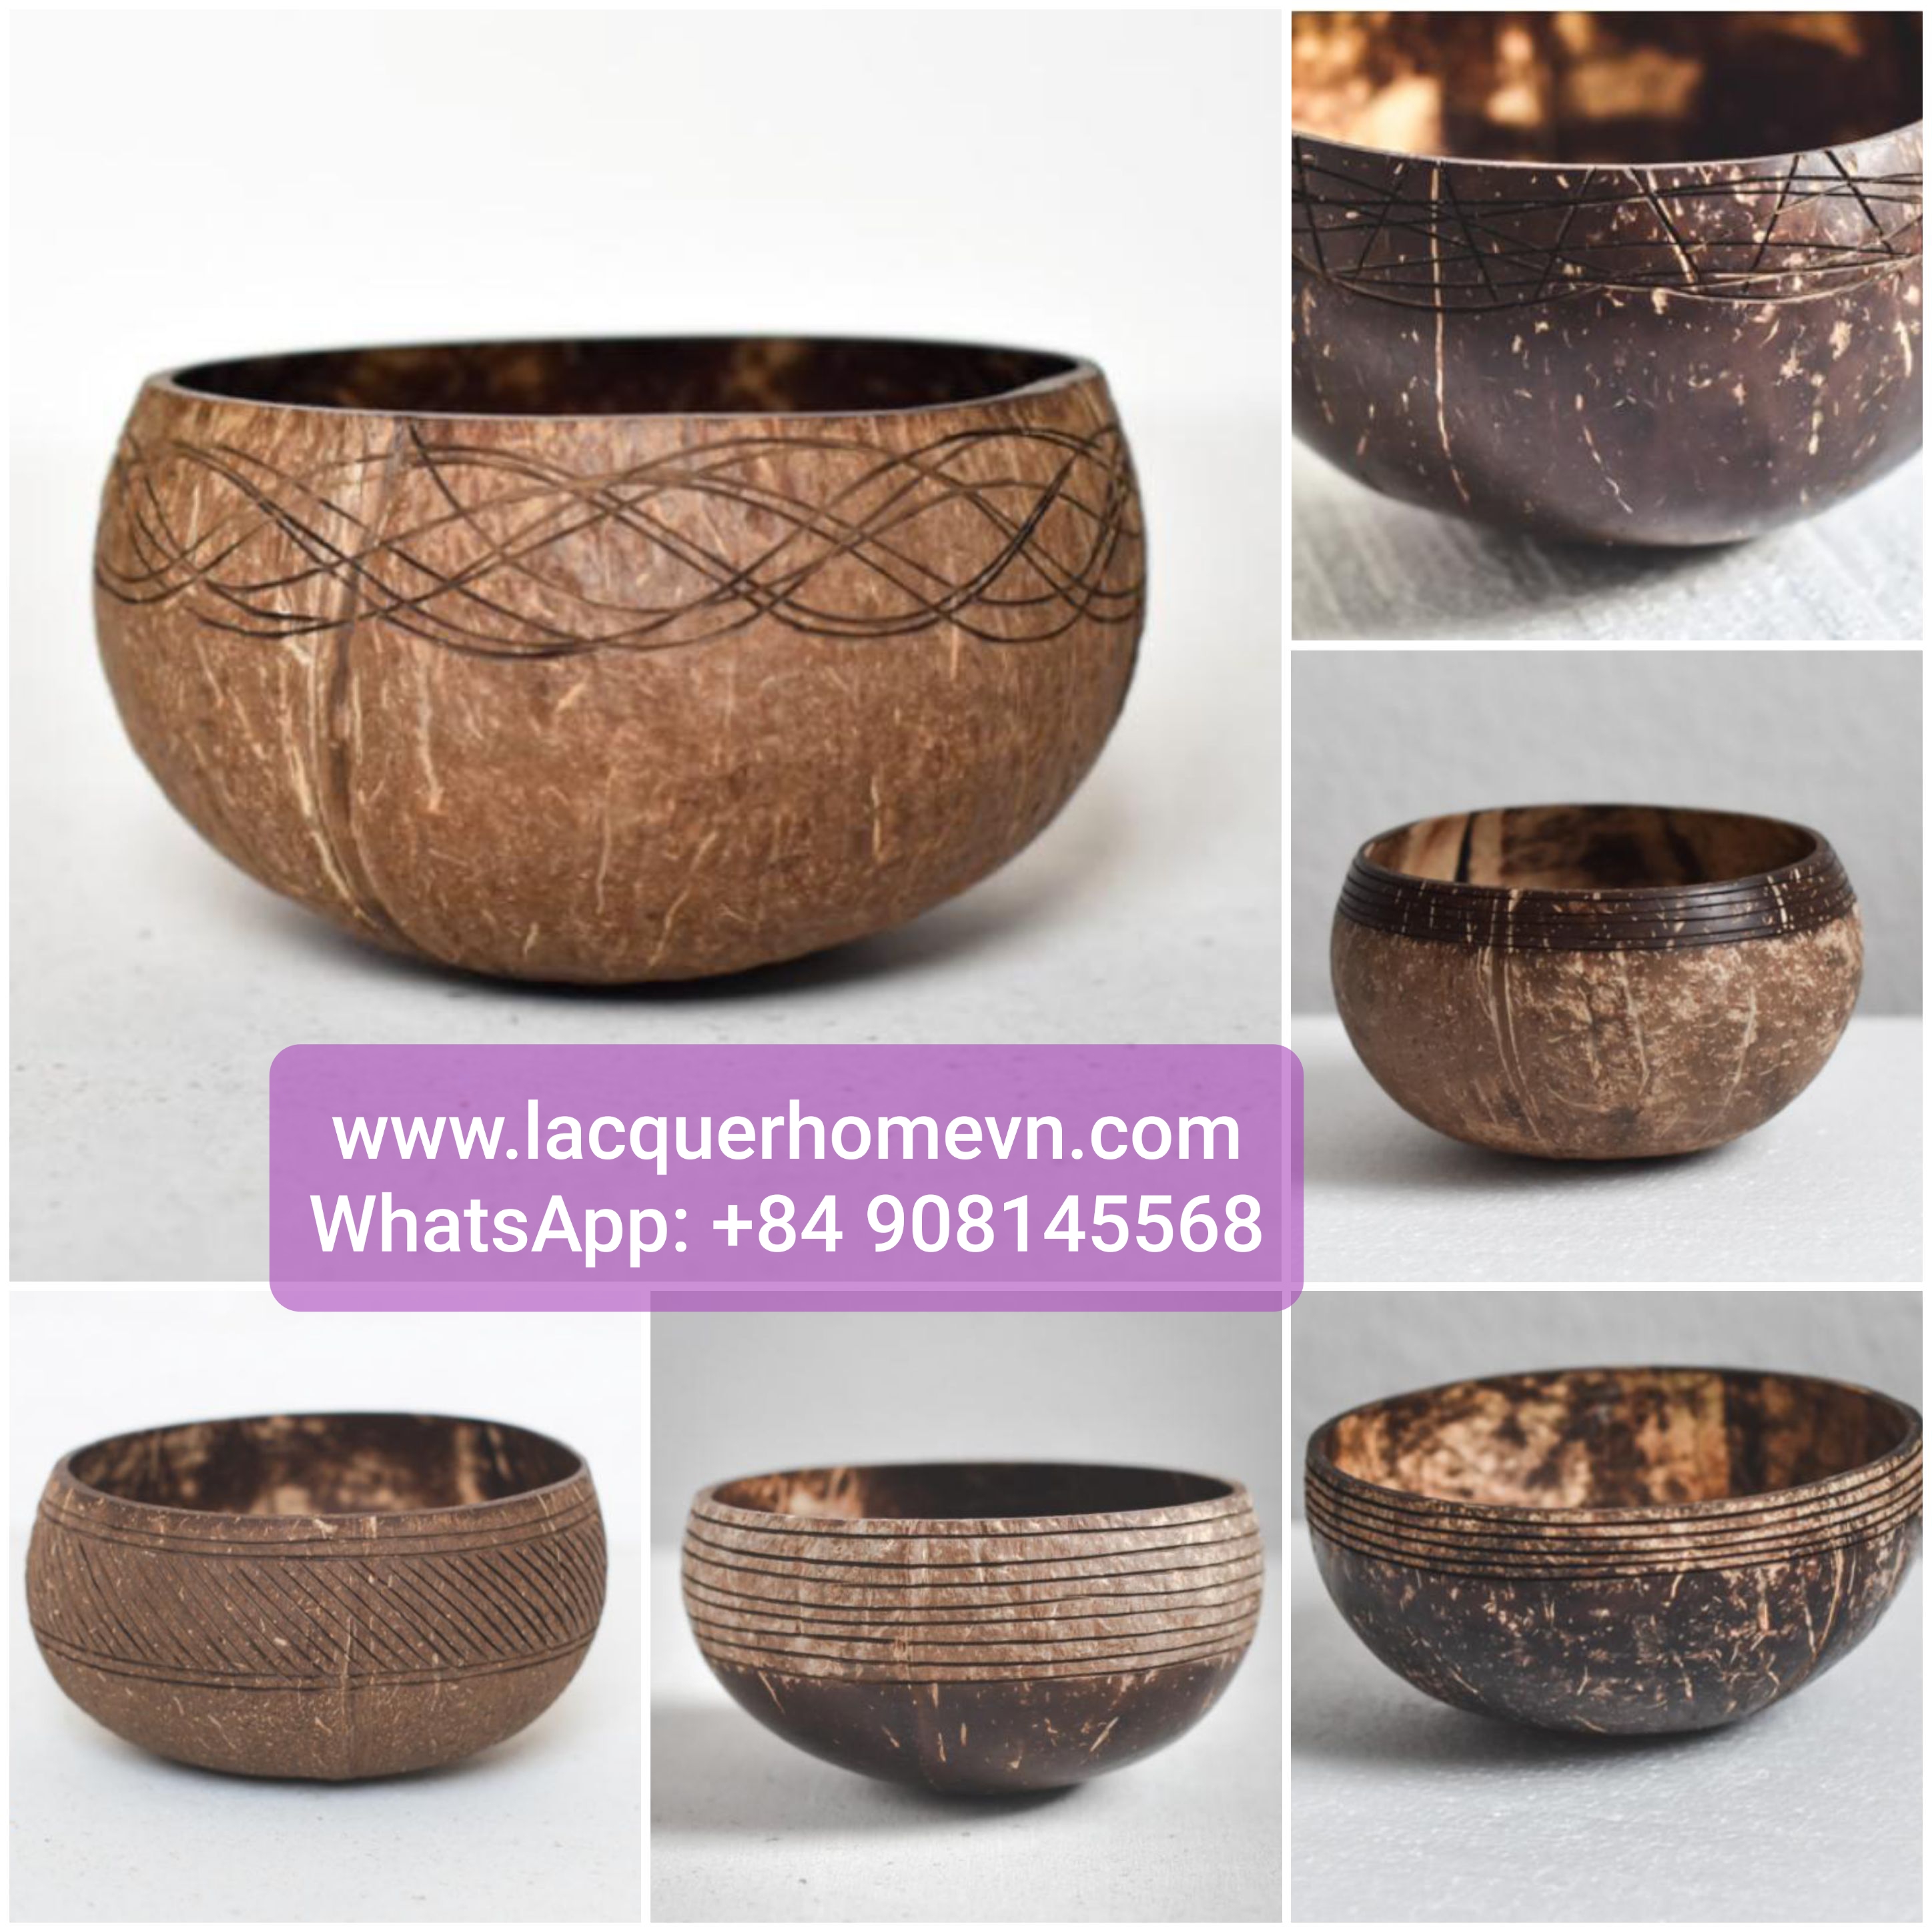 100% Natural Coconut Shell Bowl Handcrafted 